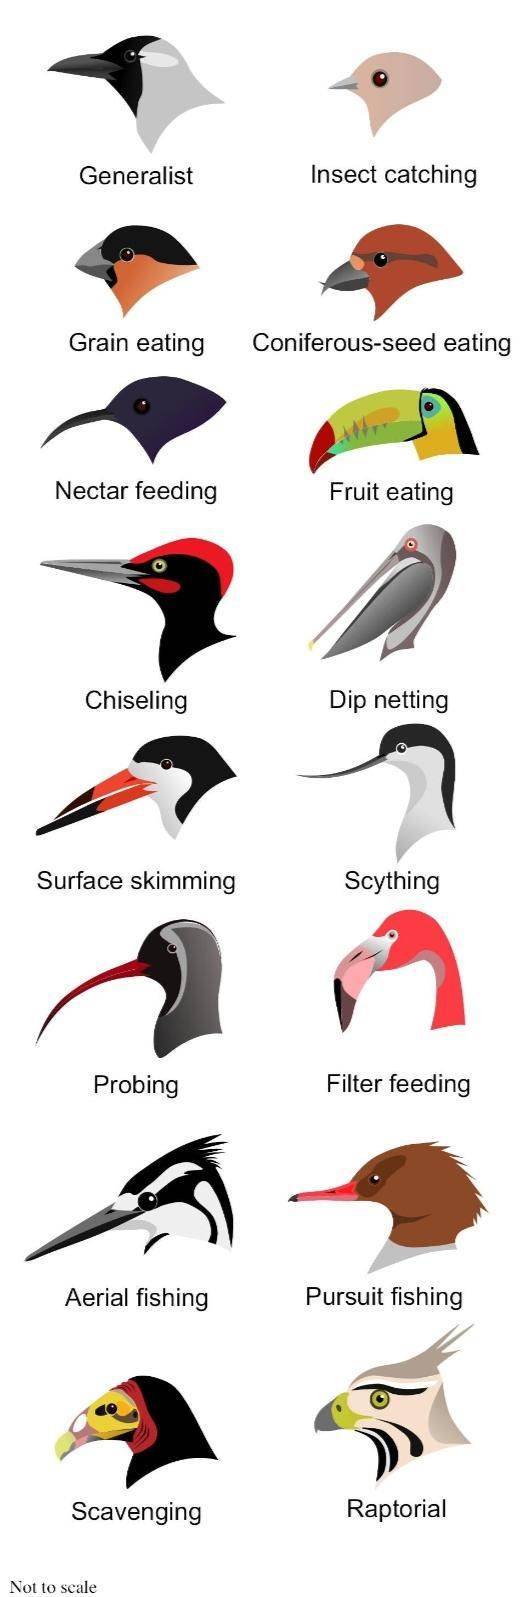 types of bird beaks - Generalist Insect catching Grain eating Coniferousseed eating Nectar feeding Fruit eating Chiseling Dip netting Surface skimming Scything Probing Filter feeding Aerial fishing Pursuit fishing Scavenging Raptorial Not to scale